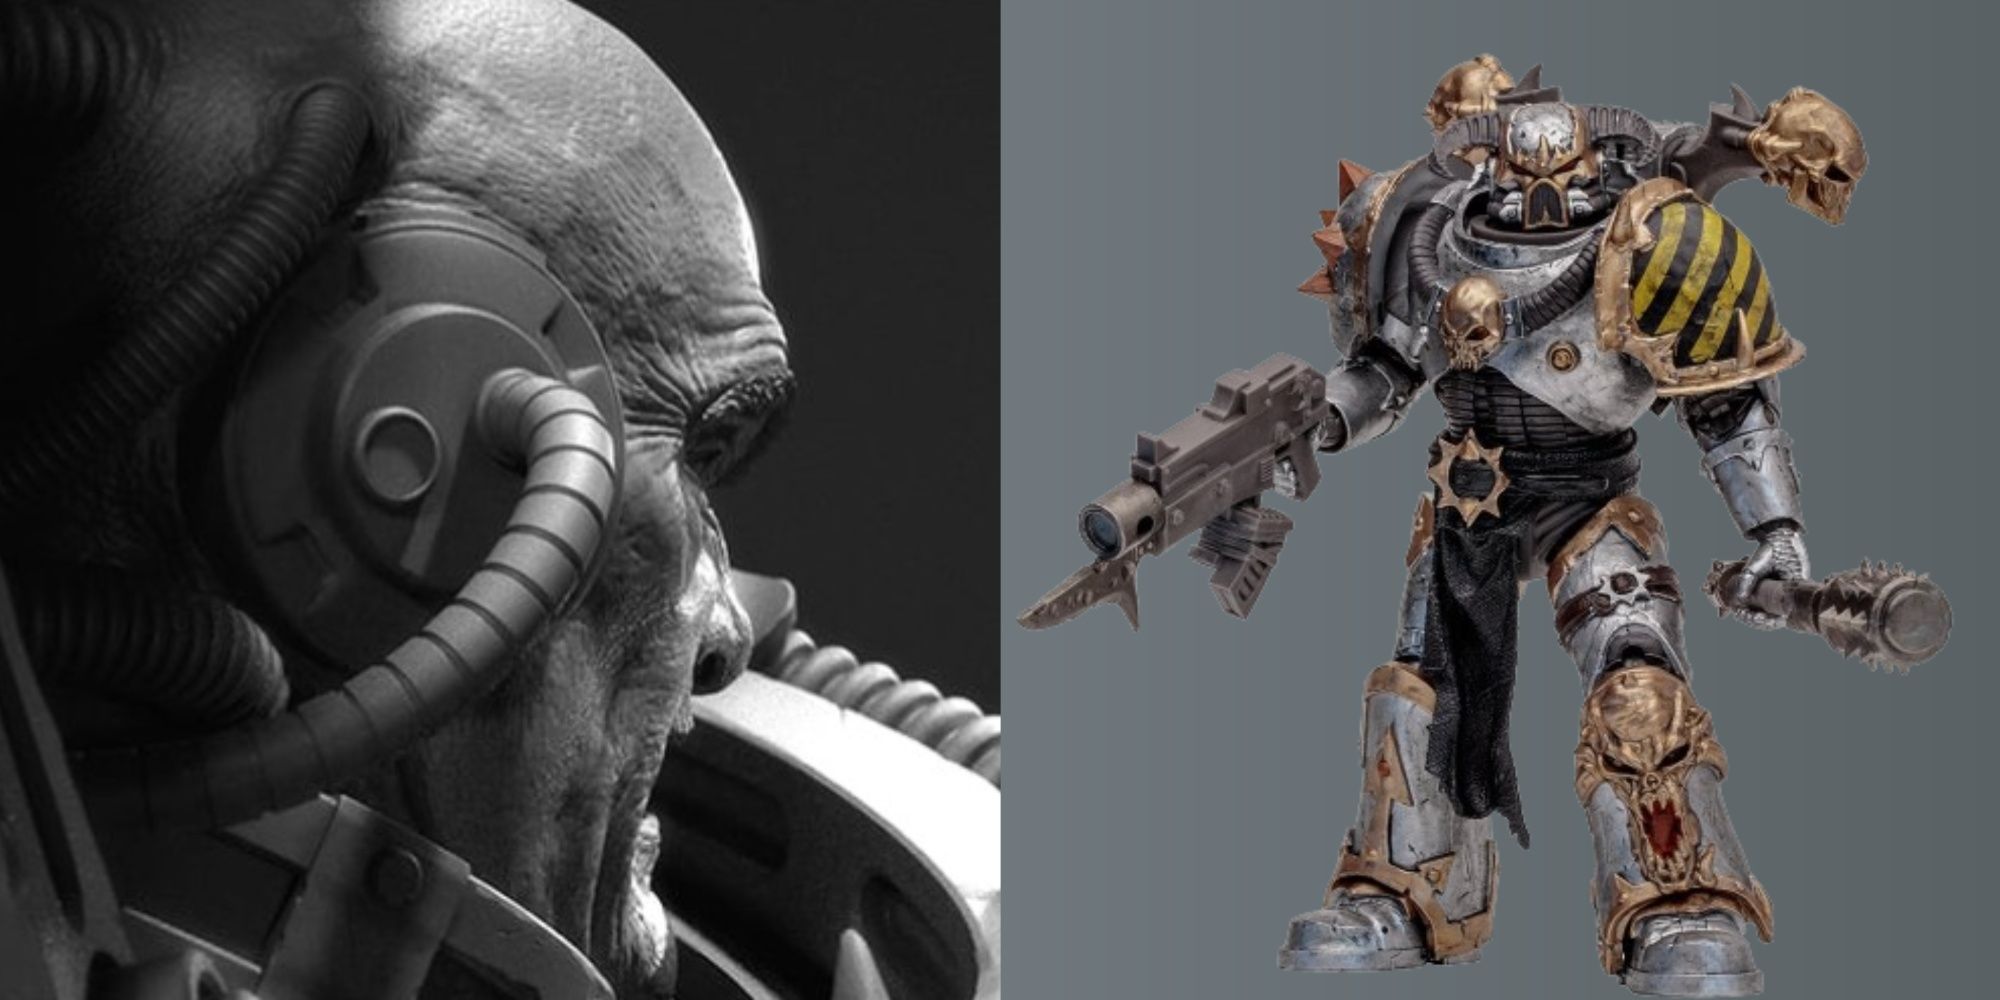 warhammer abaddon statue close up, and iron warrior action figure